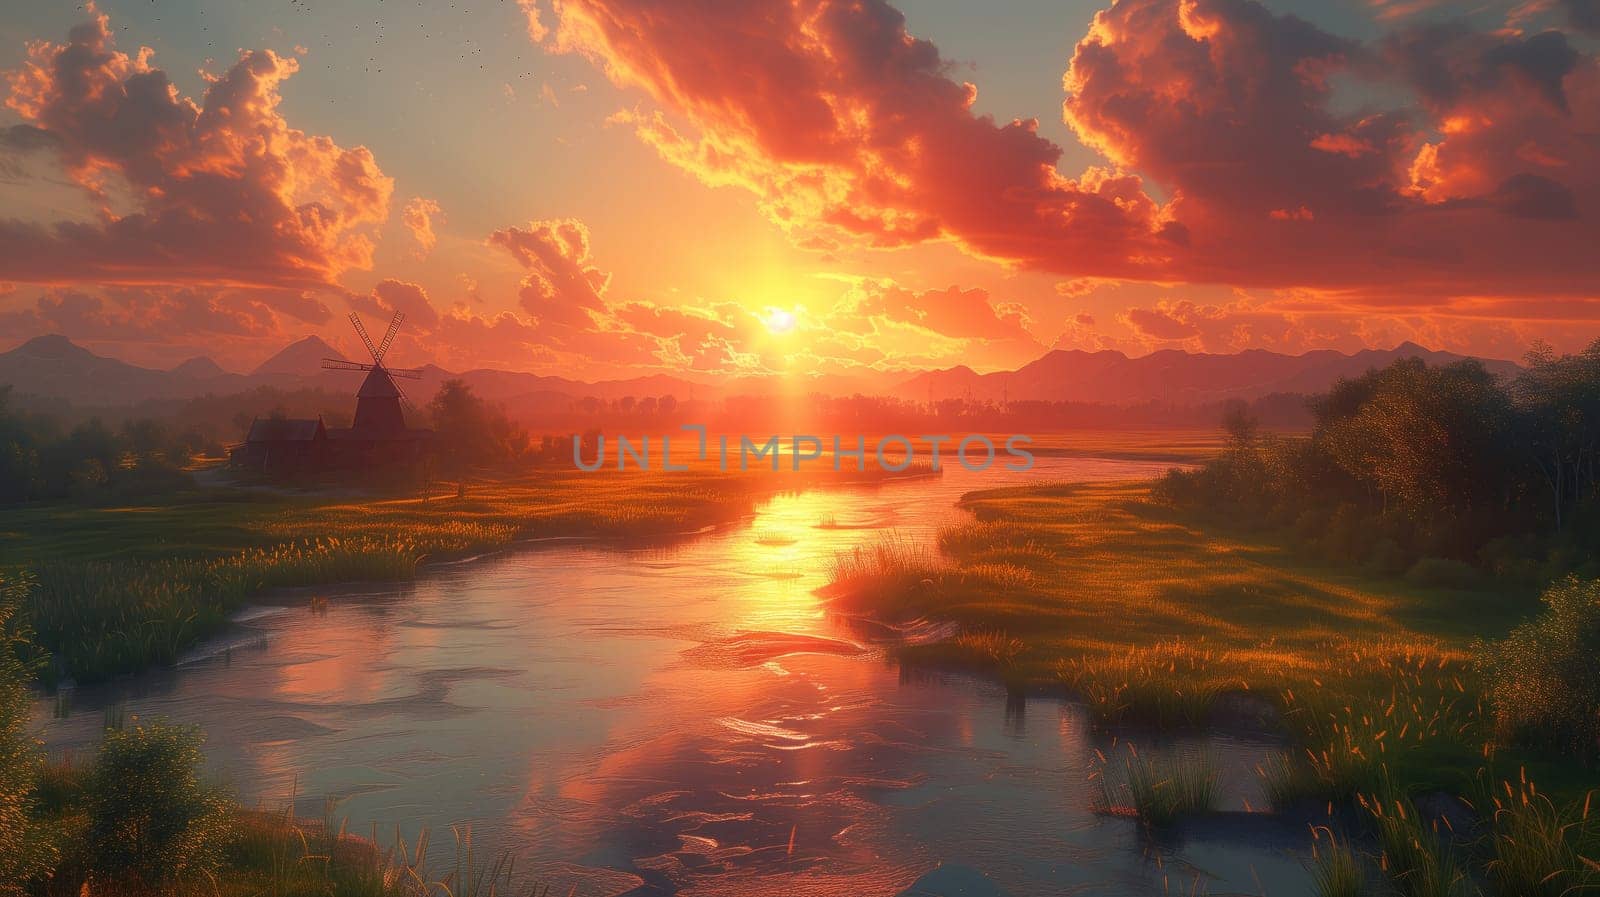 the sun is setting over a river in a painting by richwolf